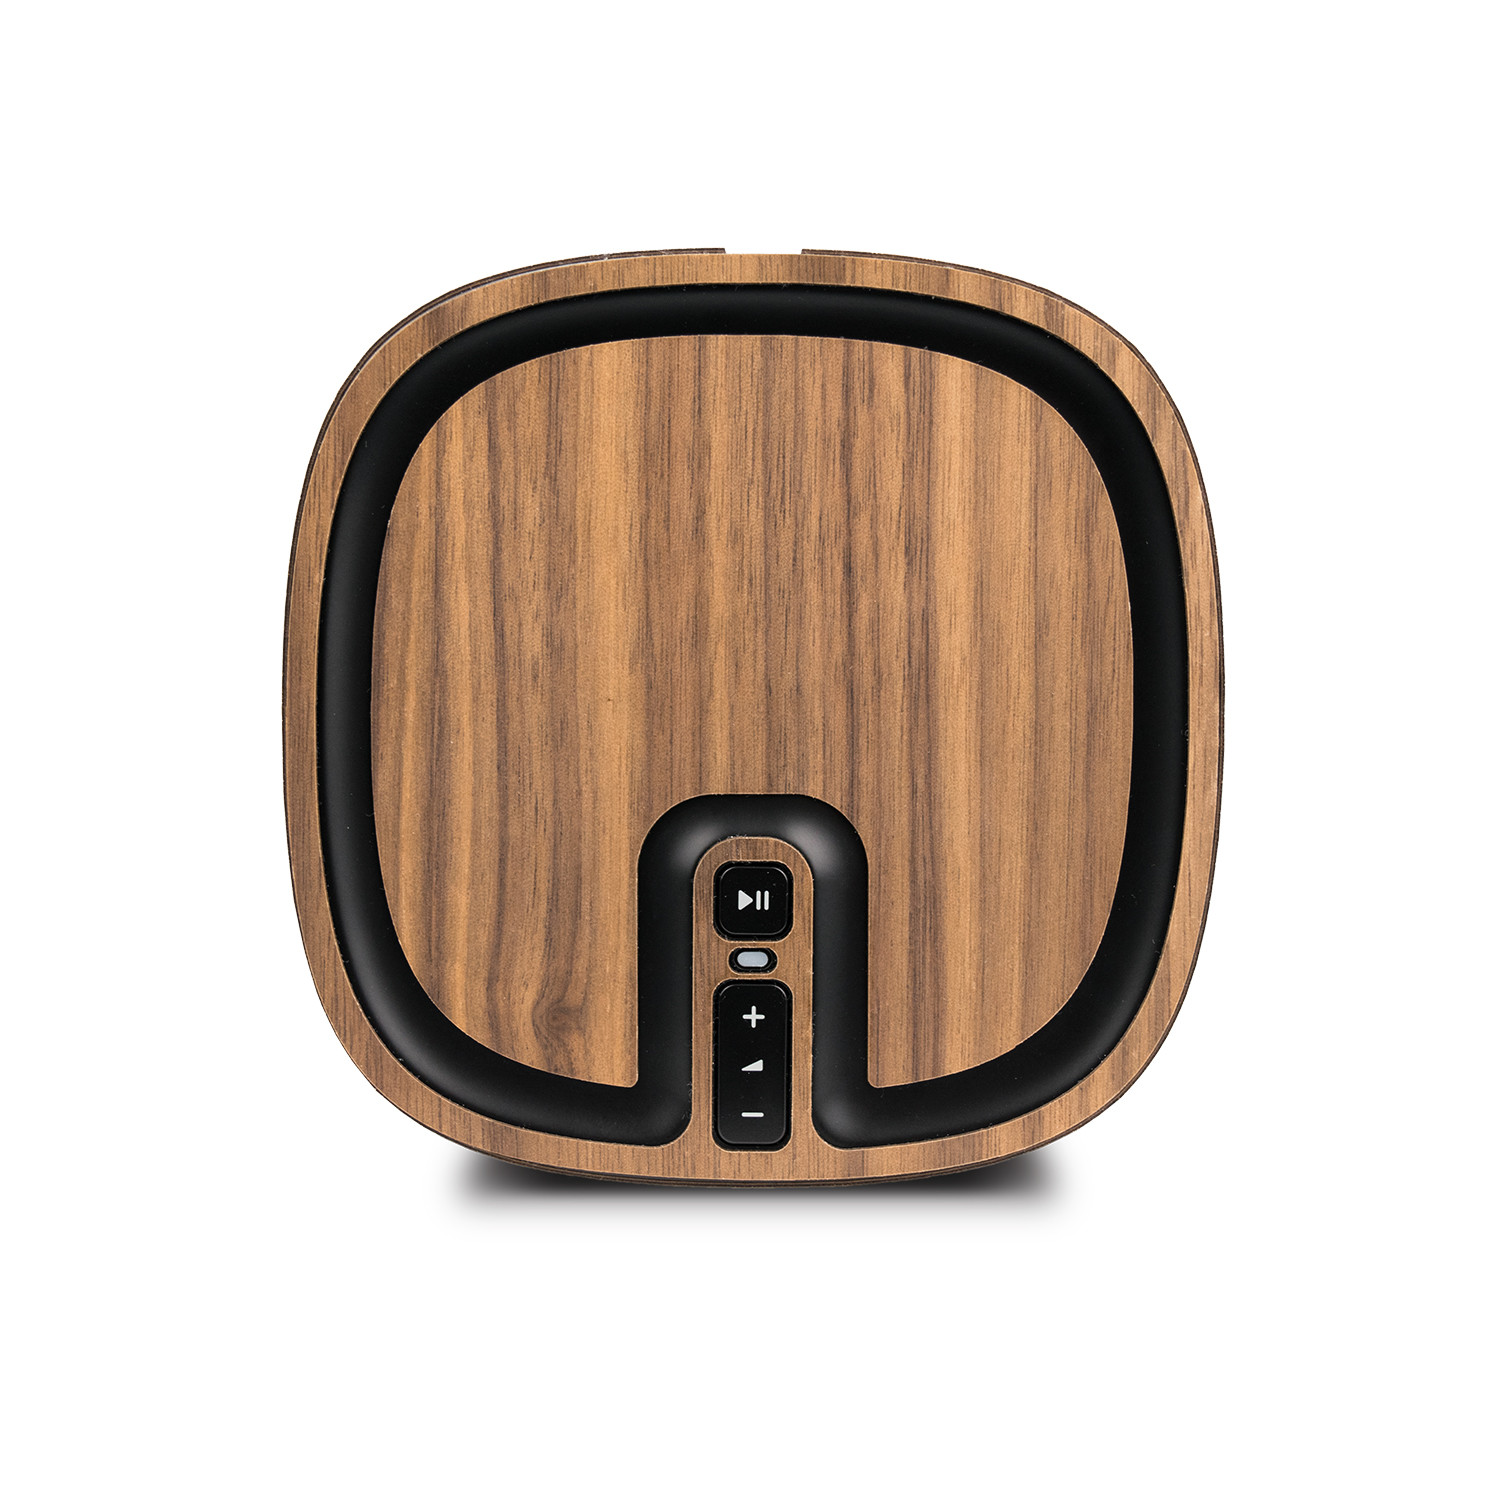 Real wood cover for Sonos speakers